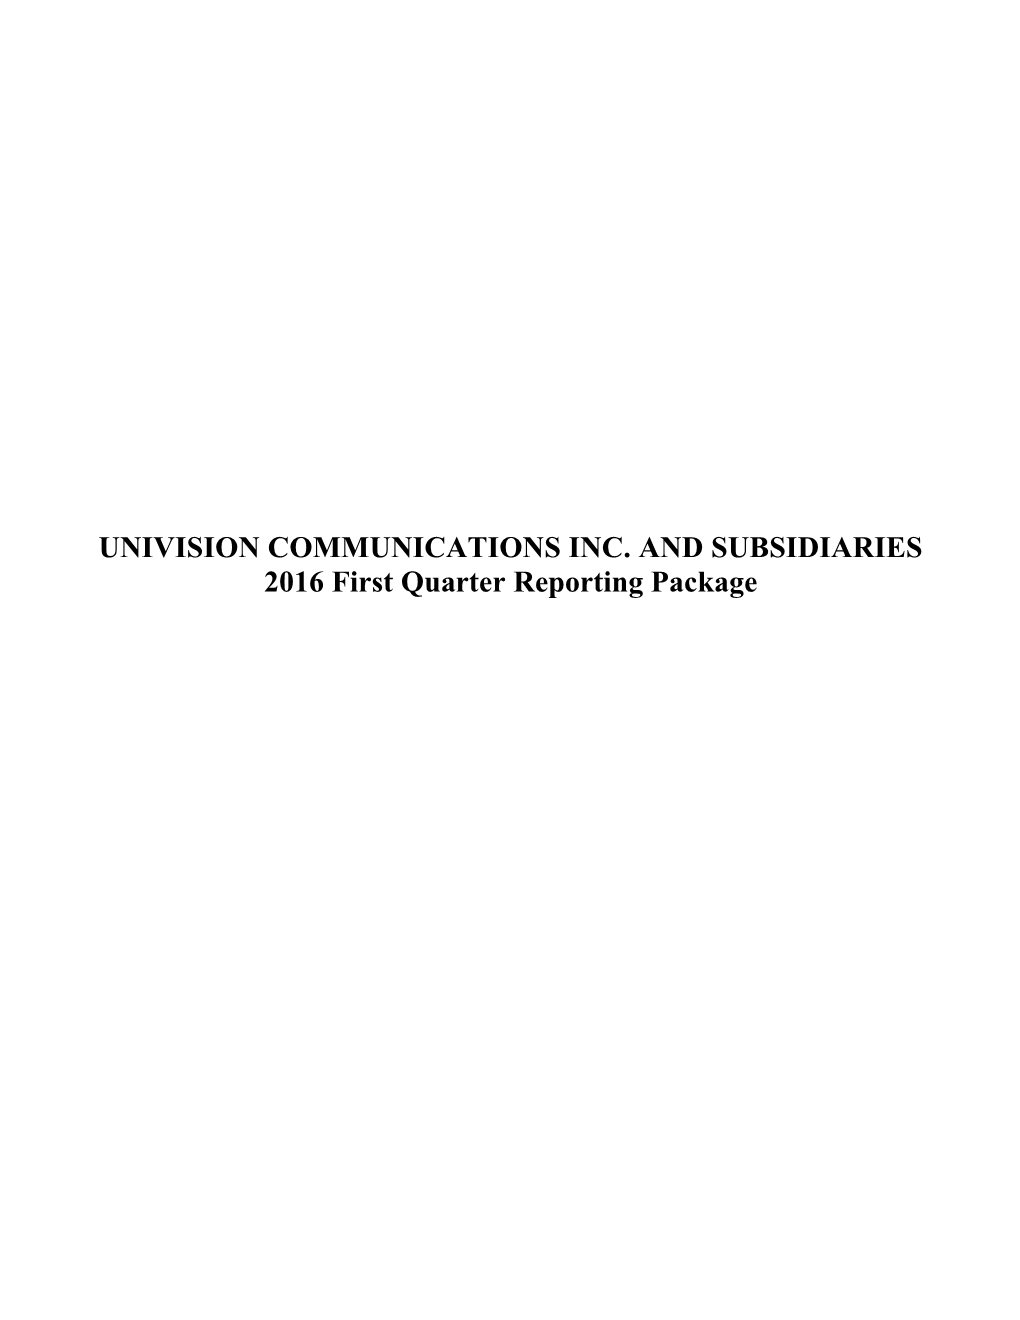 UNIVISION COMMUNICATIONS INC. and SUBSIDIARIES 2016 First Quarter Reporting Package